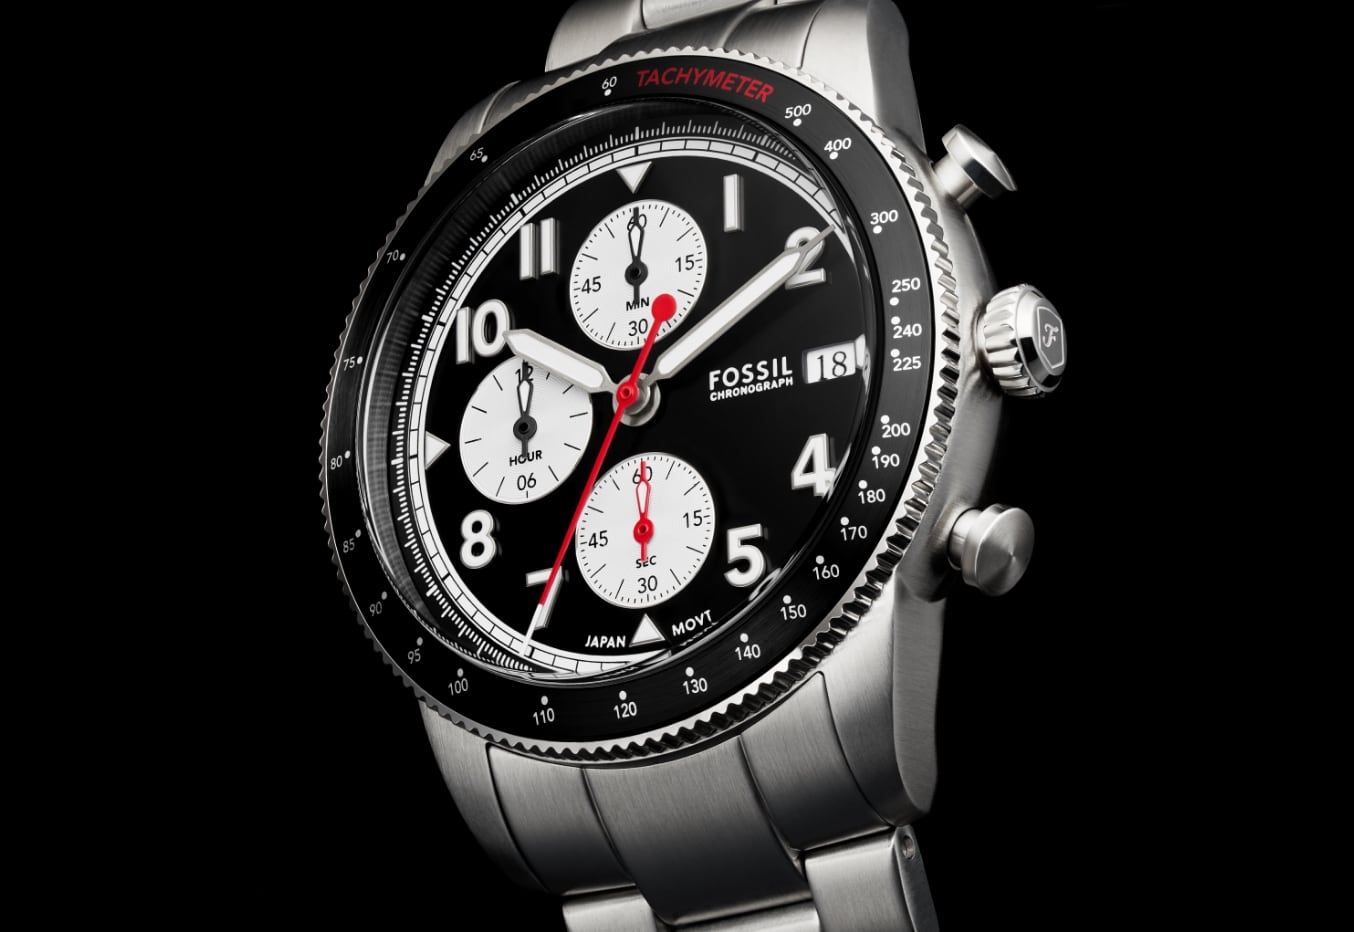 A silver-tone Sport Tourer watch with a black dial.